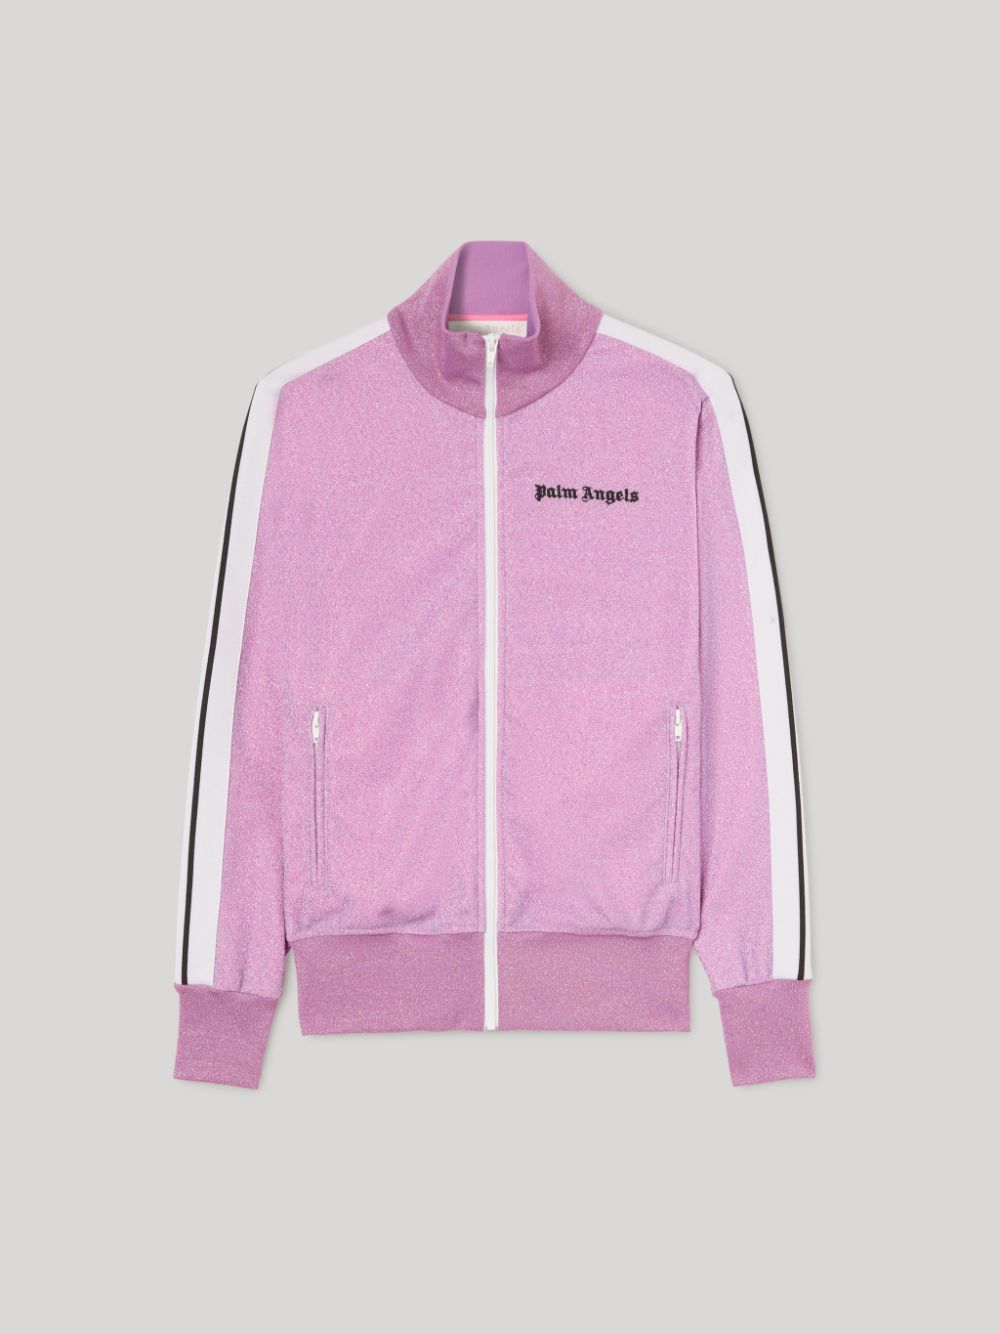 PINK TRACK JACKET in pink - Palm Angels® Official